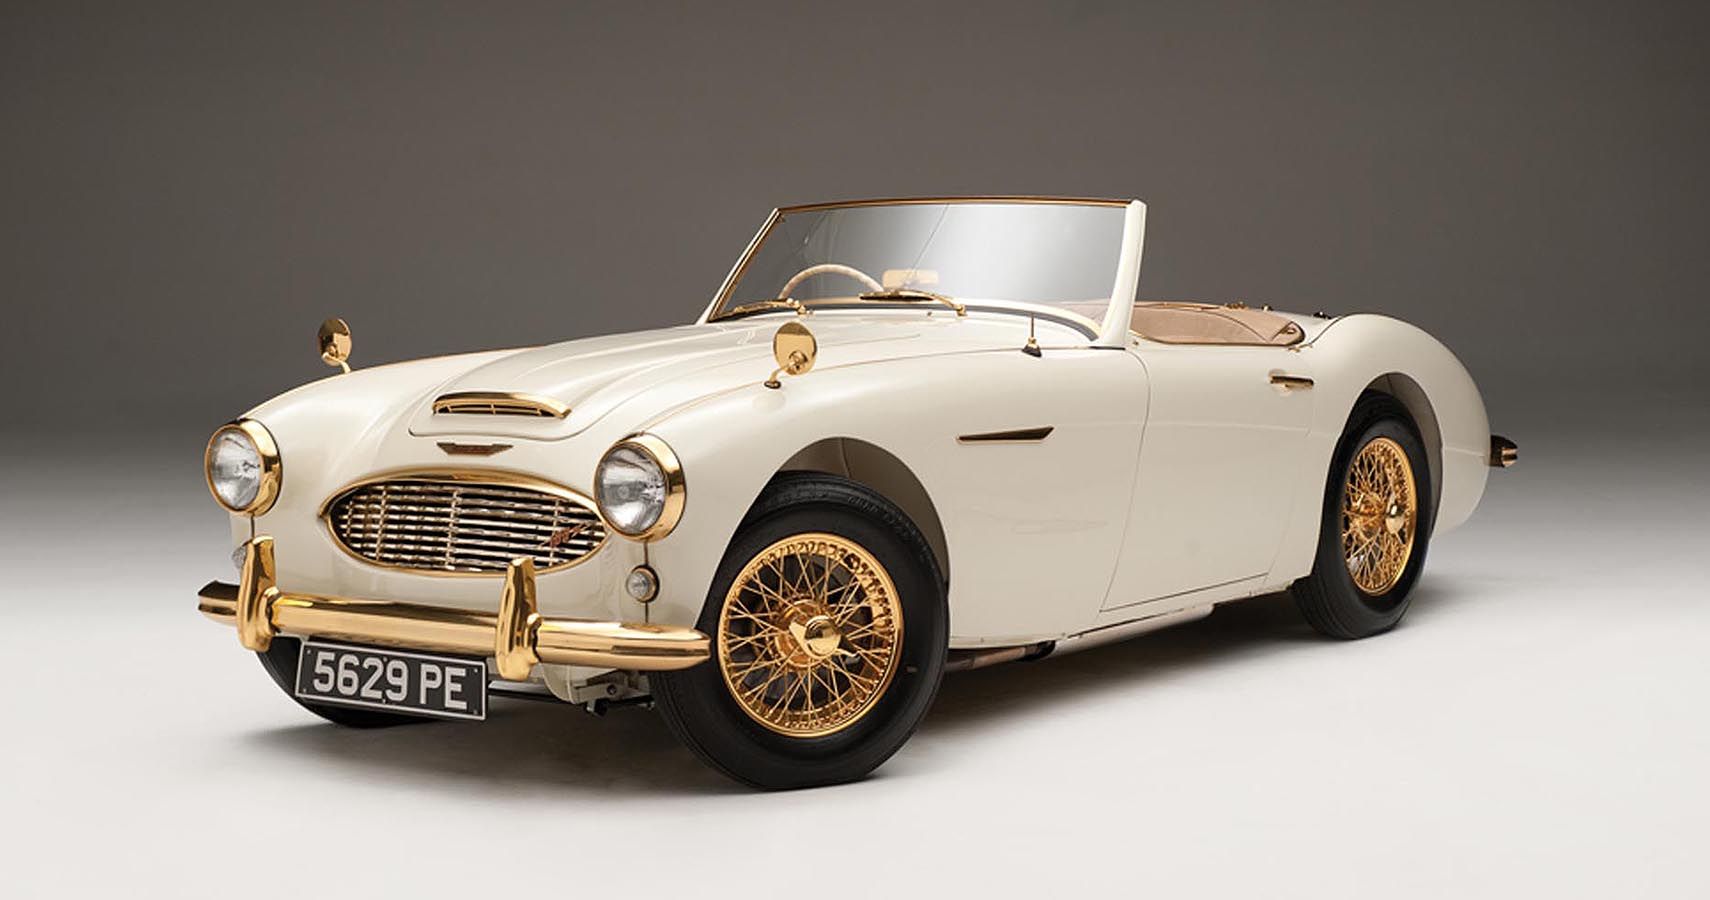 Known As “Goldie”, This Austin-Healey Was A Single-Made Non-Production Car That Came With The Most Sumptuous Luxury The Time Could Offer Back Then, And Later Painstakingly Restored To Its Former Glory By Dennis Collins Himself